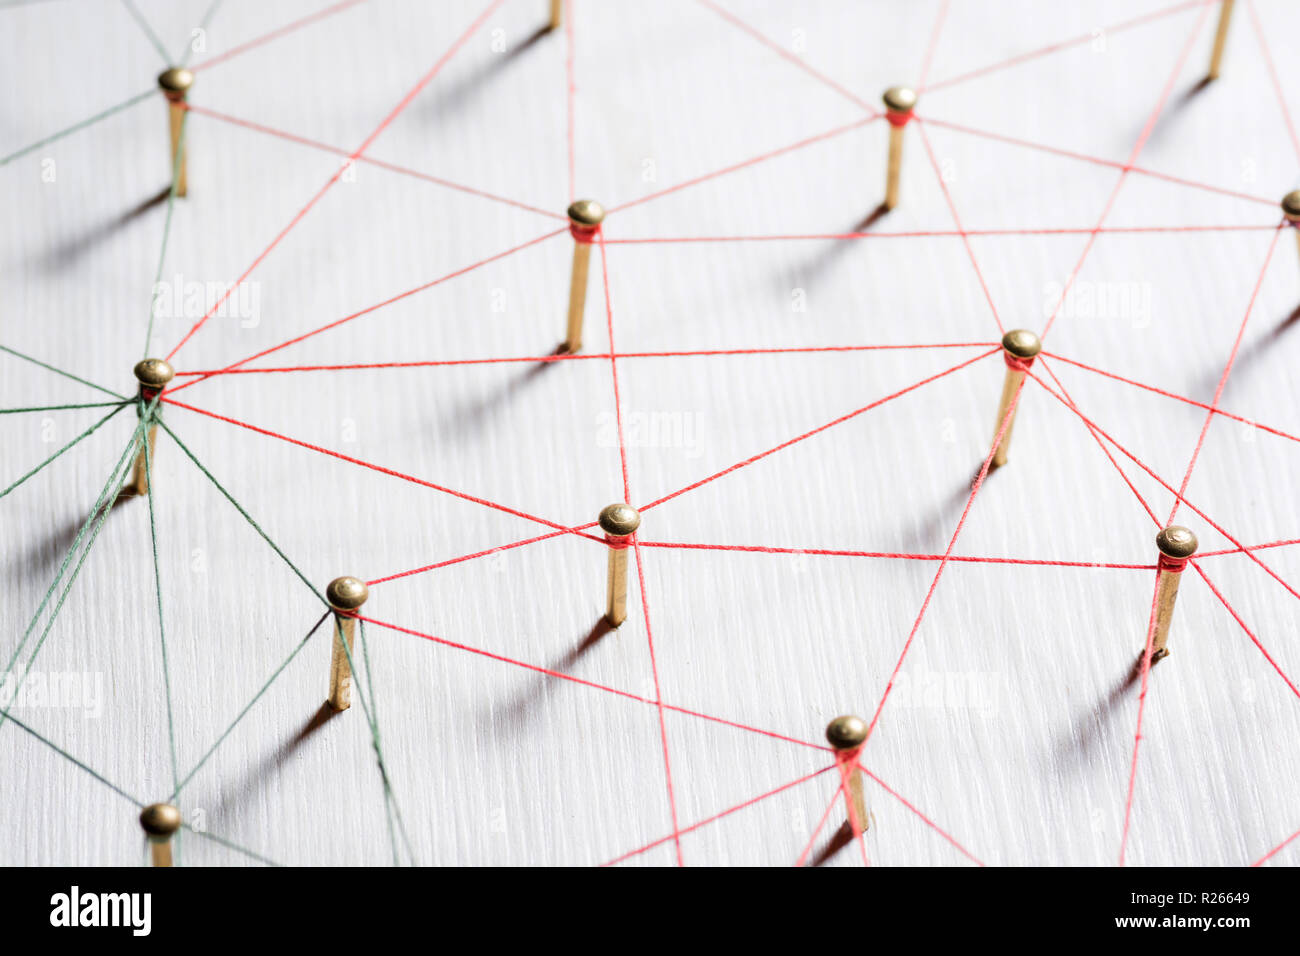 Linking entities. Network, networking, social media, internet communication abstract. A small network connected to a larger network. Web of gold wires on white wooden background. Network hub or key person. Stock Photo